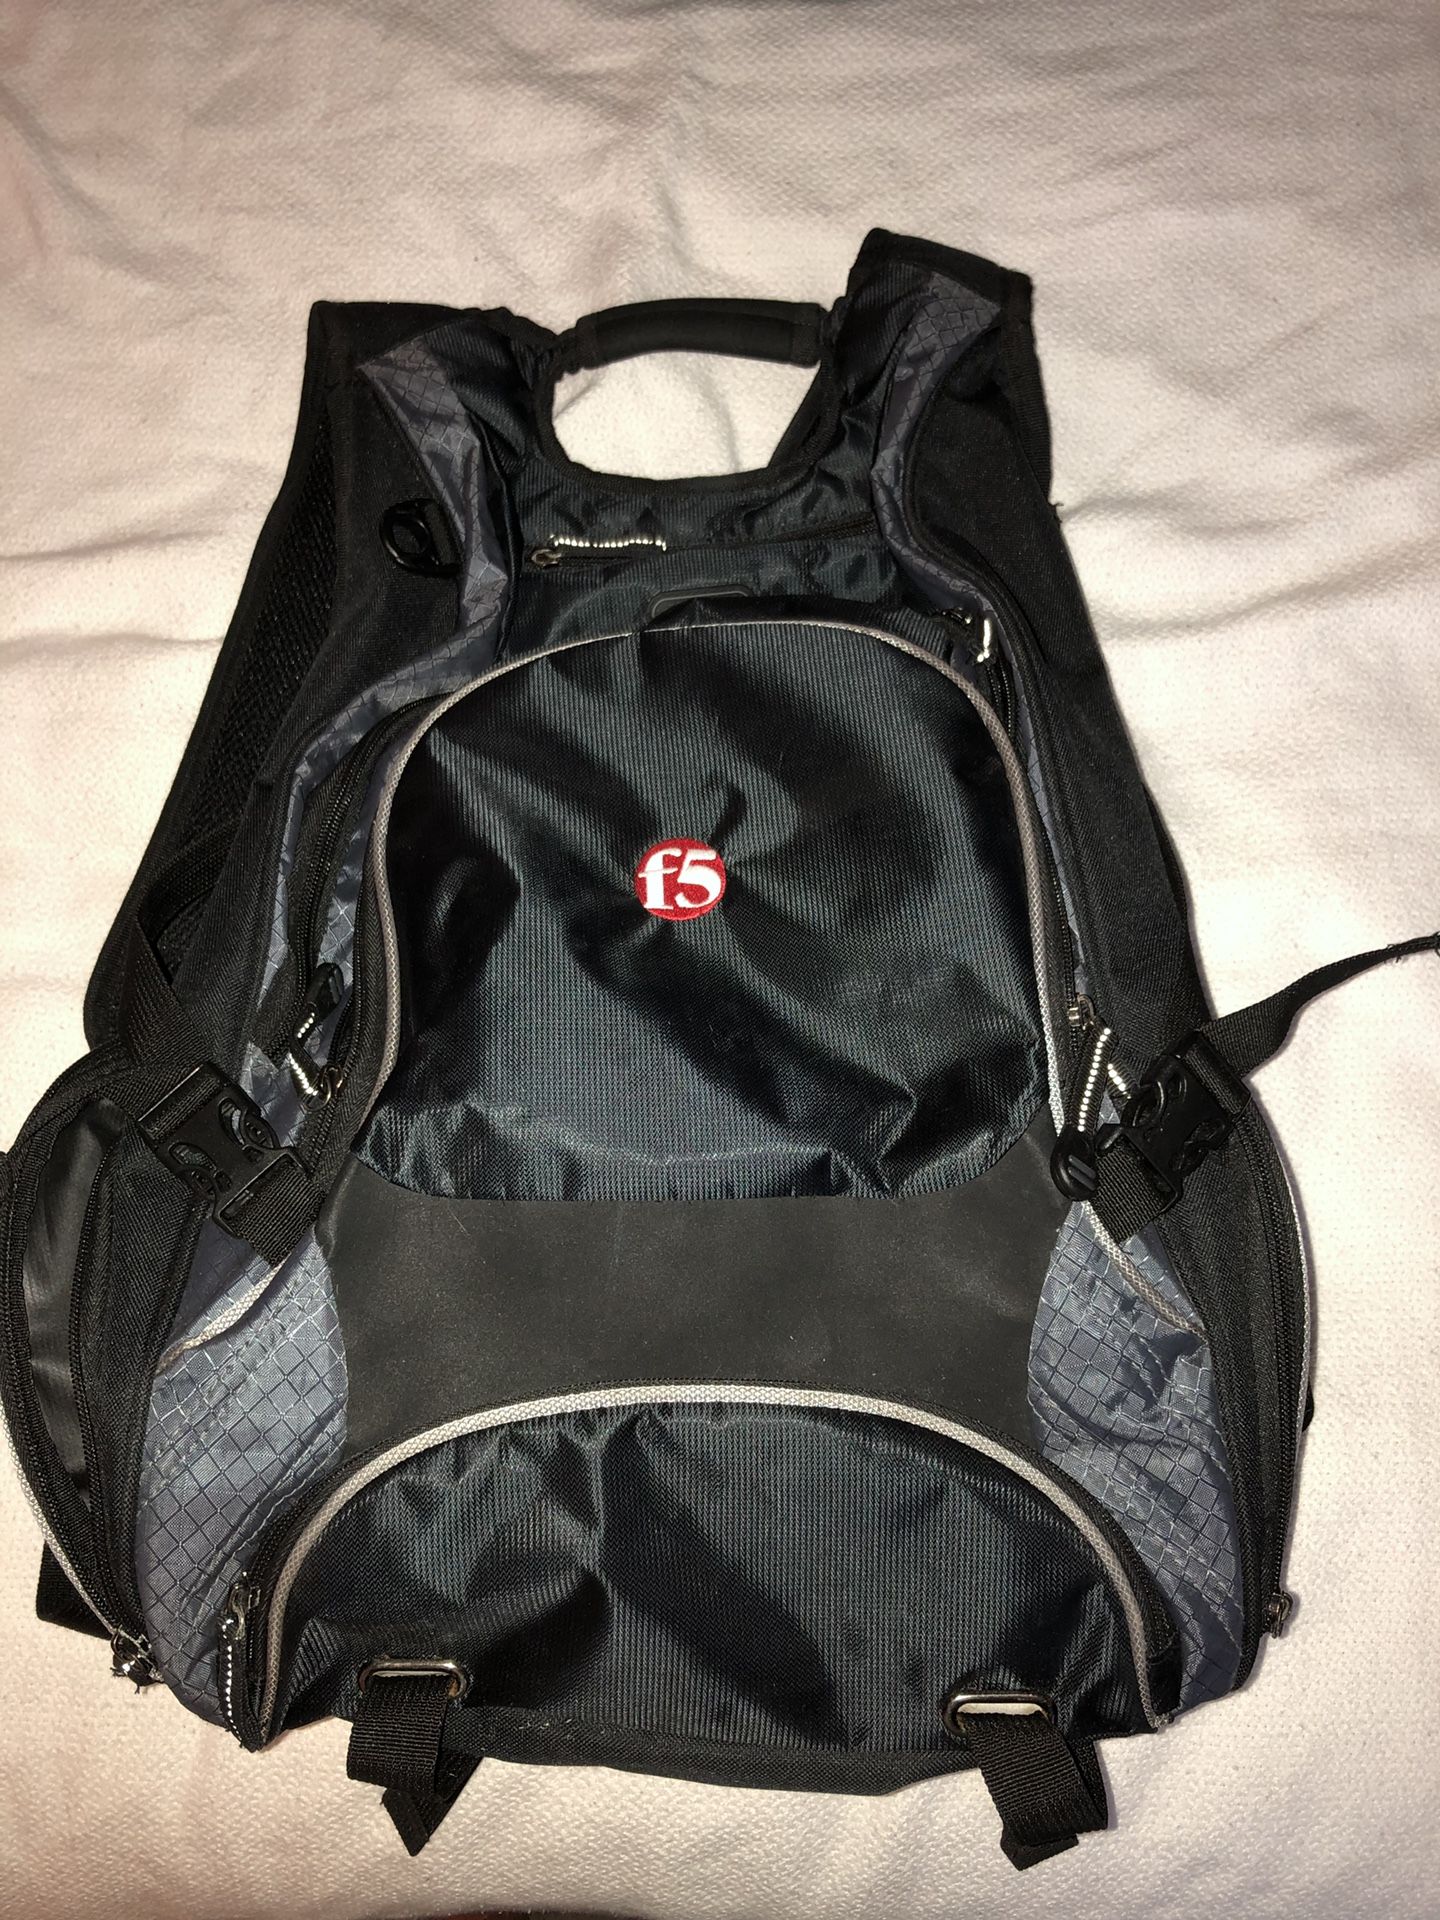 Backpack, water resistant, black for electronics and laptop